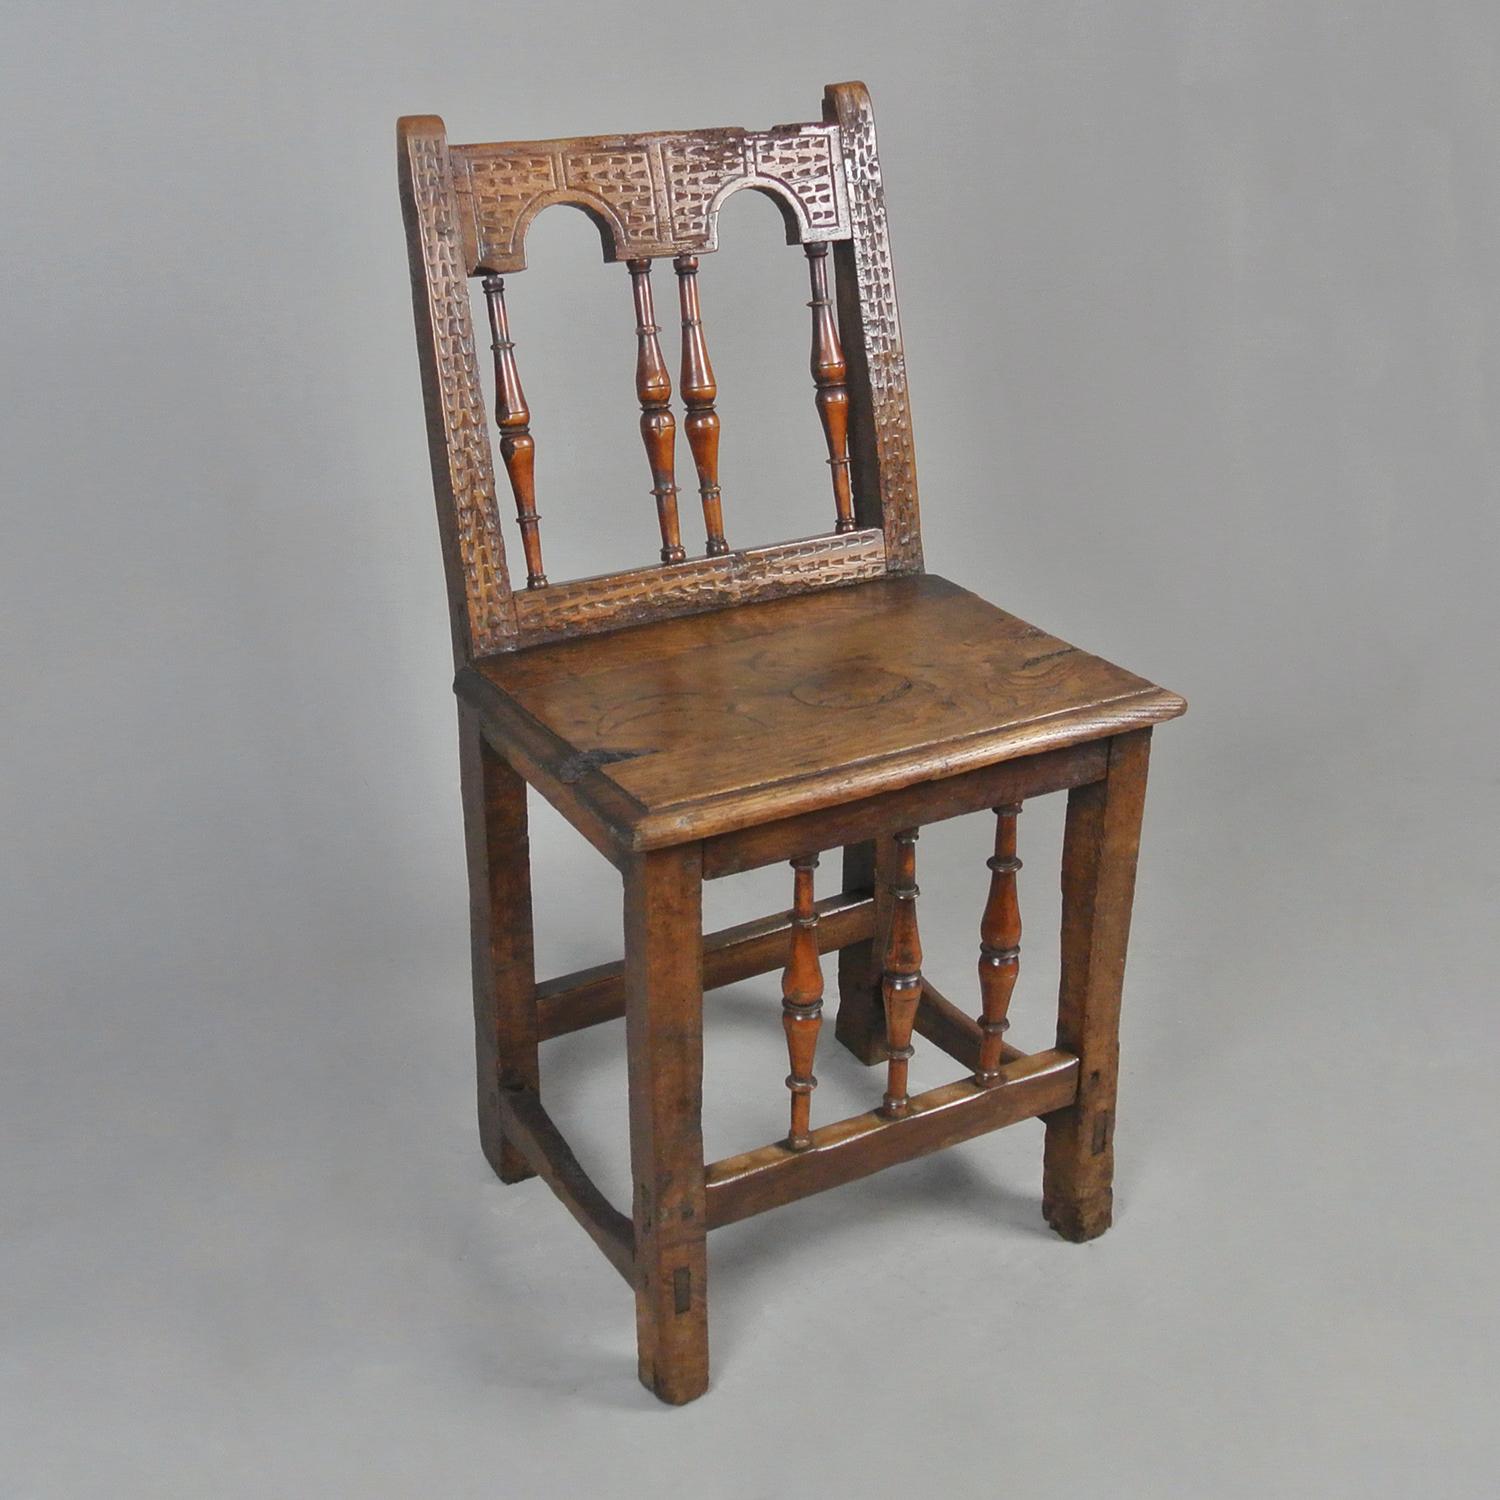 18th Century and Earlier Rare and Beautiful Walnut and Yew Spindle 'Back Stool' Chair c. 1600 For Sale